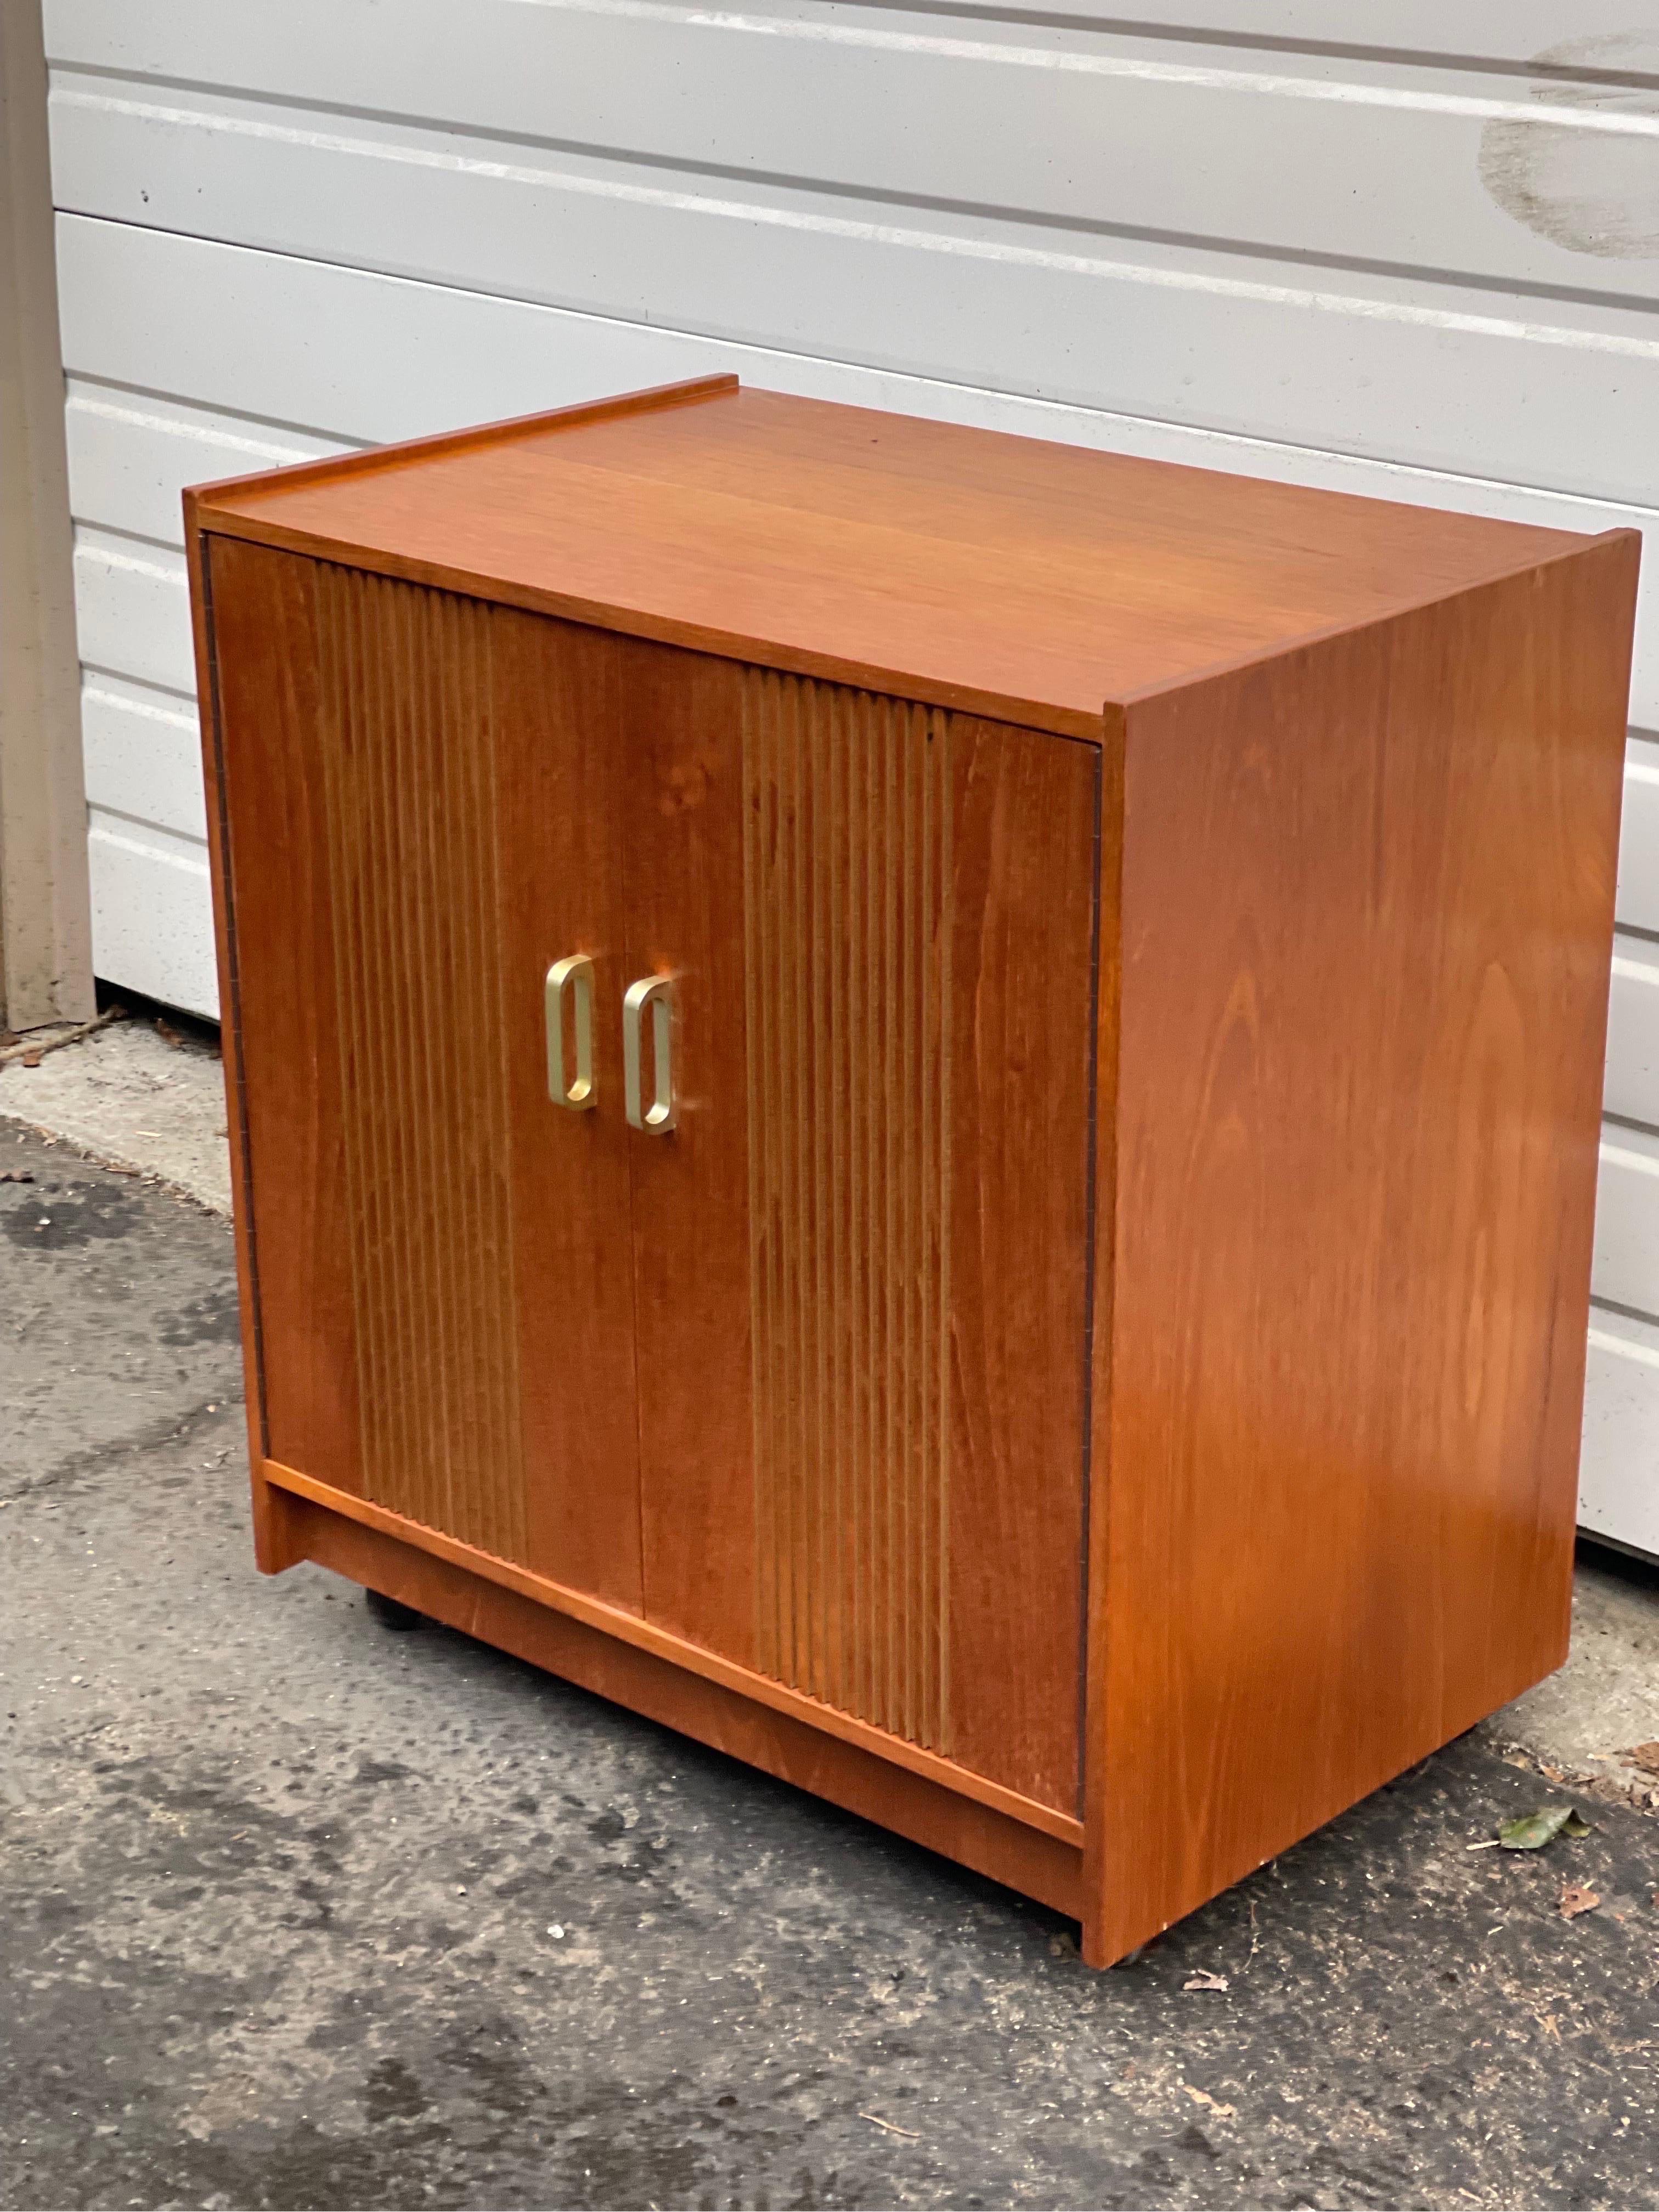 Wood Vintage Mid-Century Modern Record Cabinet with Casters, Uk Import